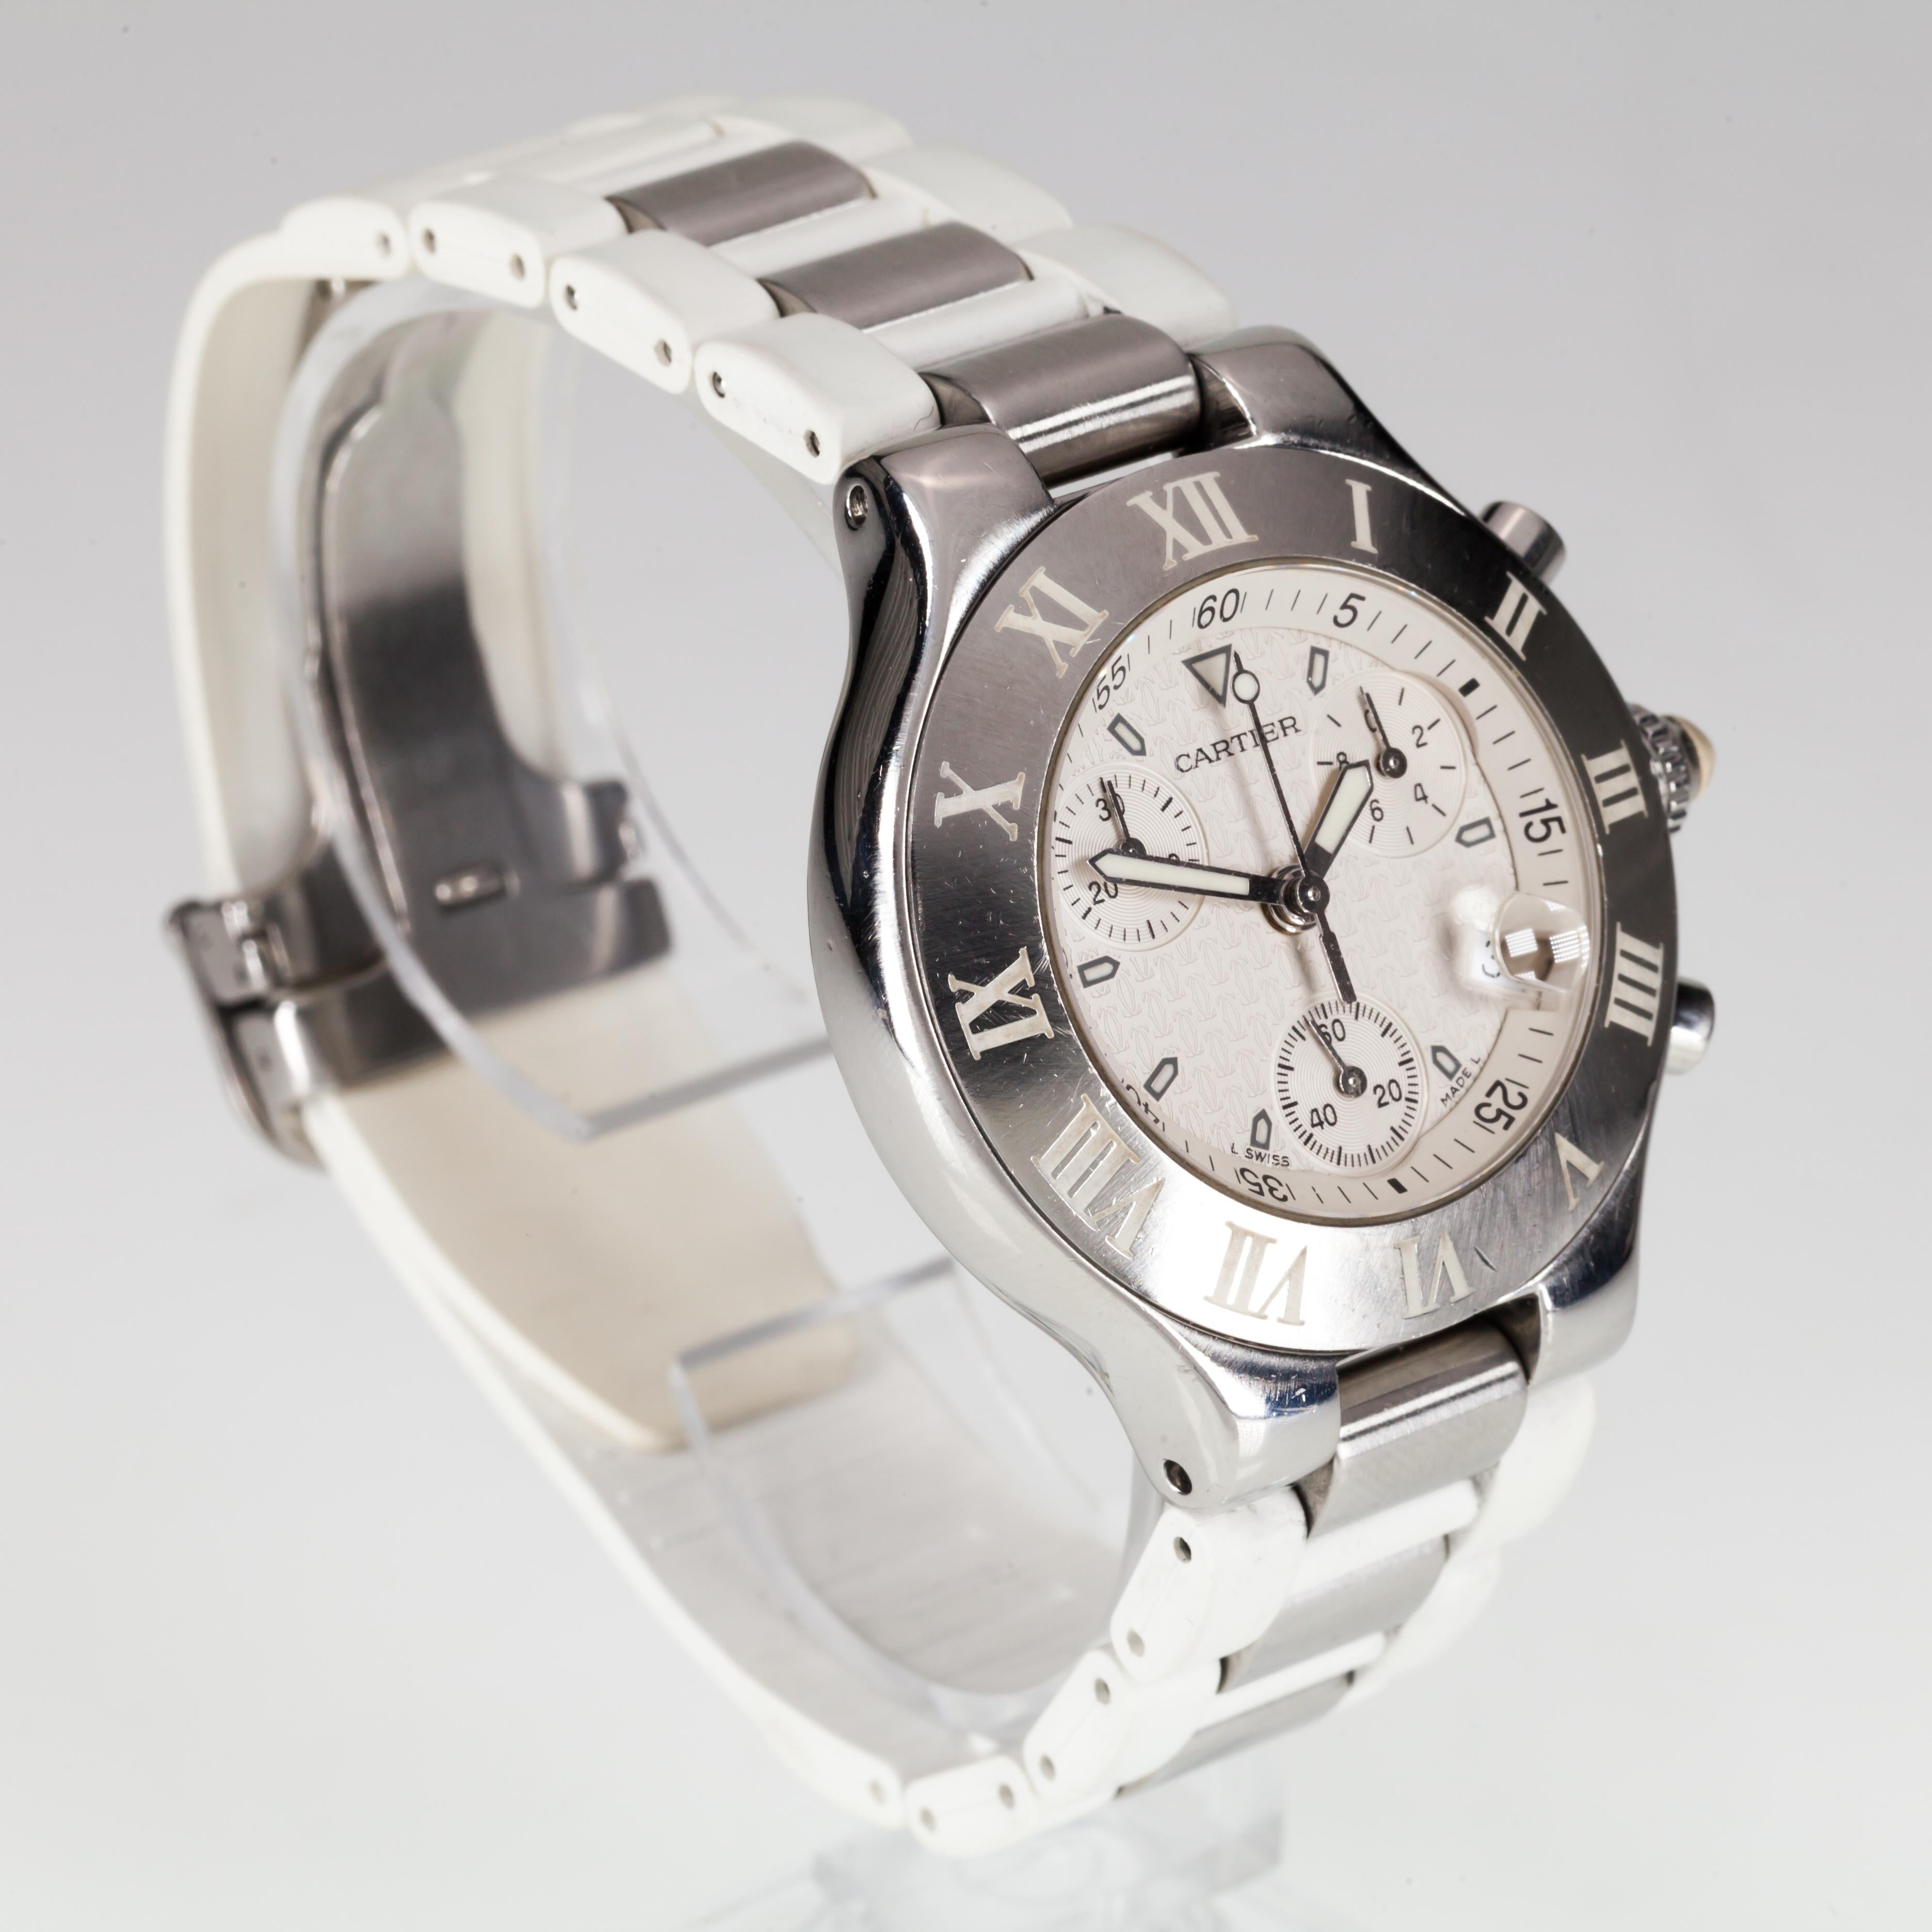 Cartier Stainless Steel Chronoscaph Quartz Watch with White Band, 2424 In Good Condition For Sale In Sherman Oaks, CA